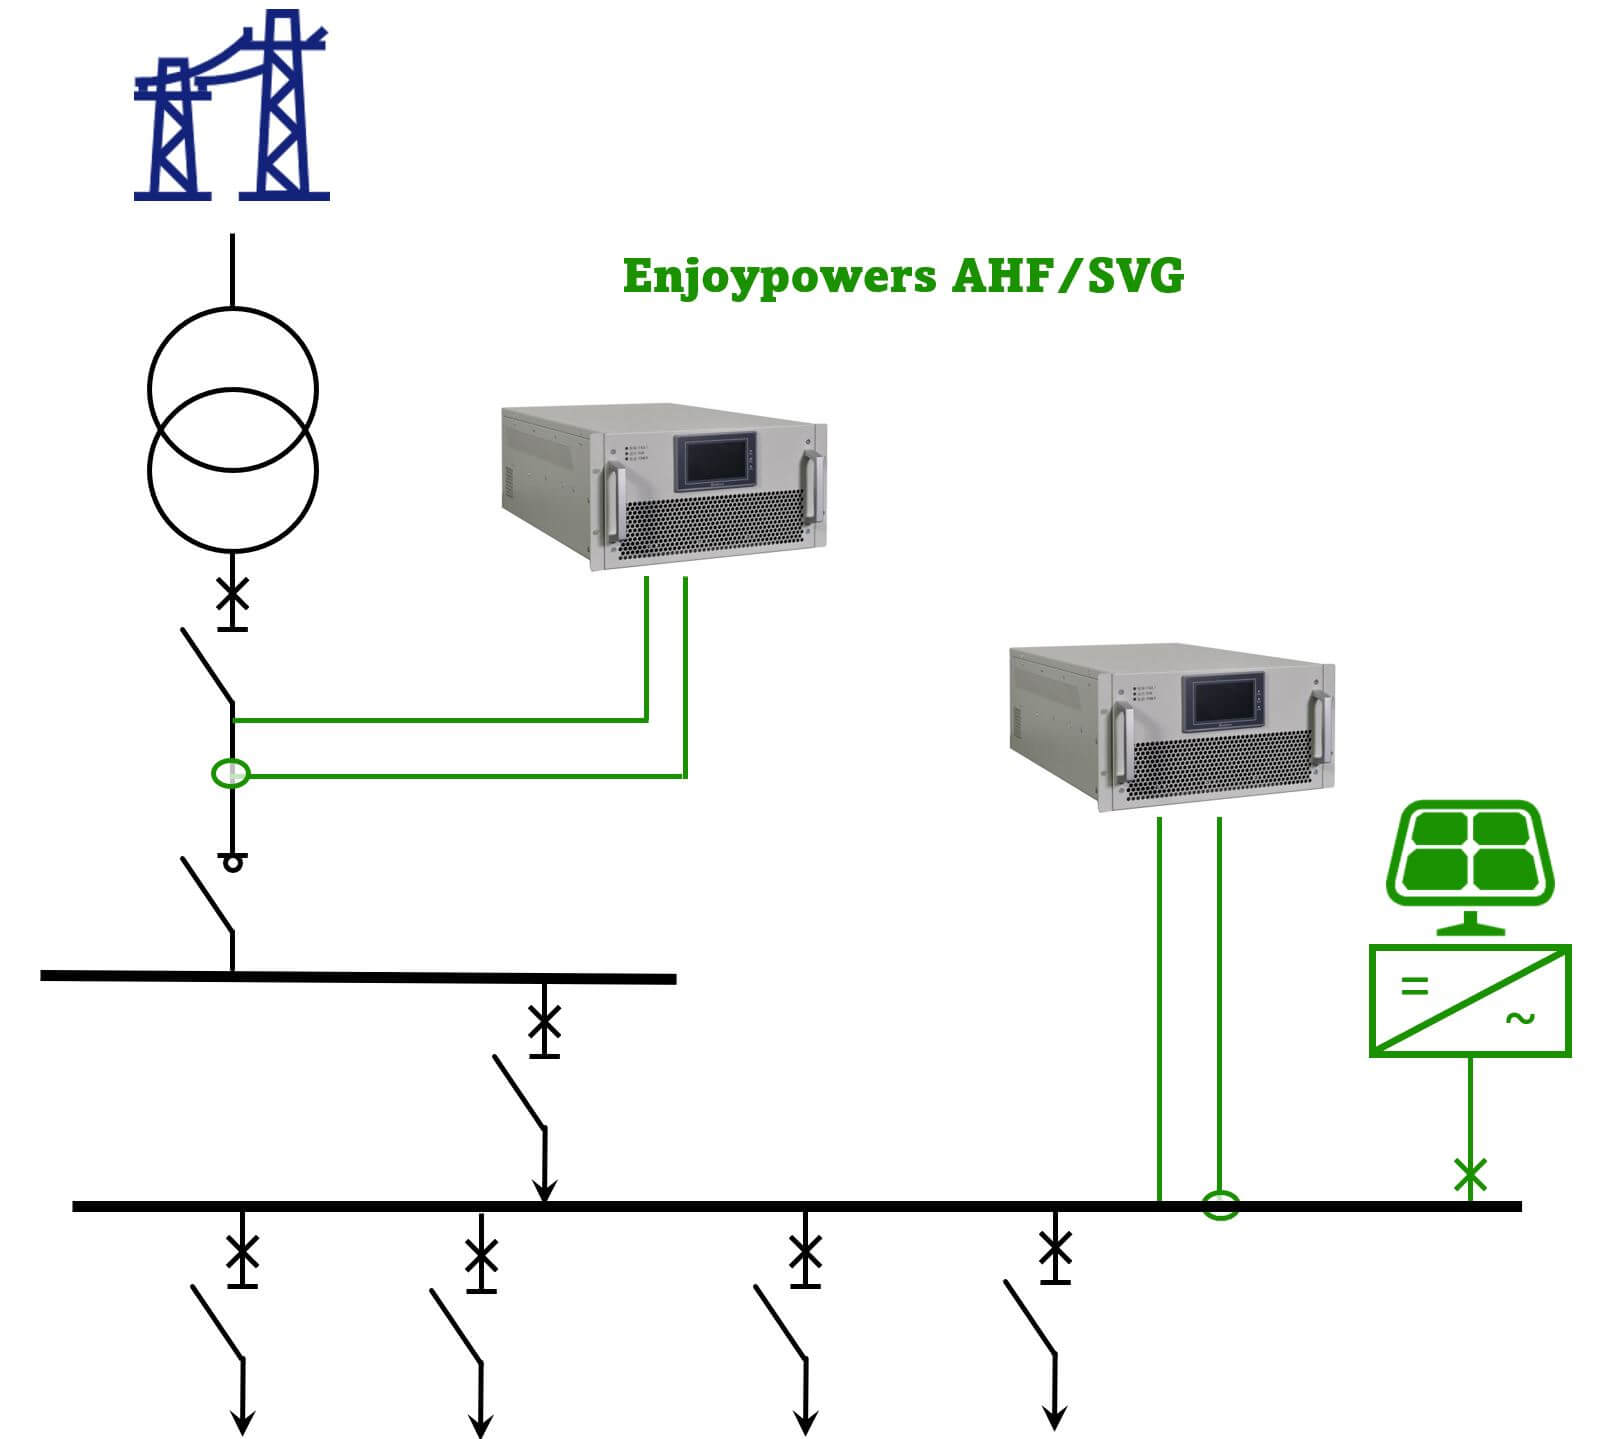 Enjoypowers' AHF SVG in photovoltaic system 2